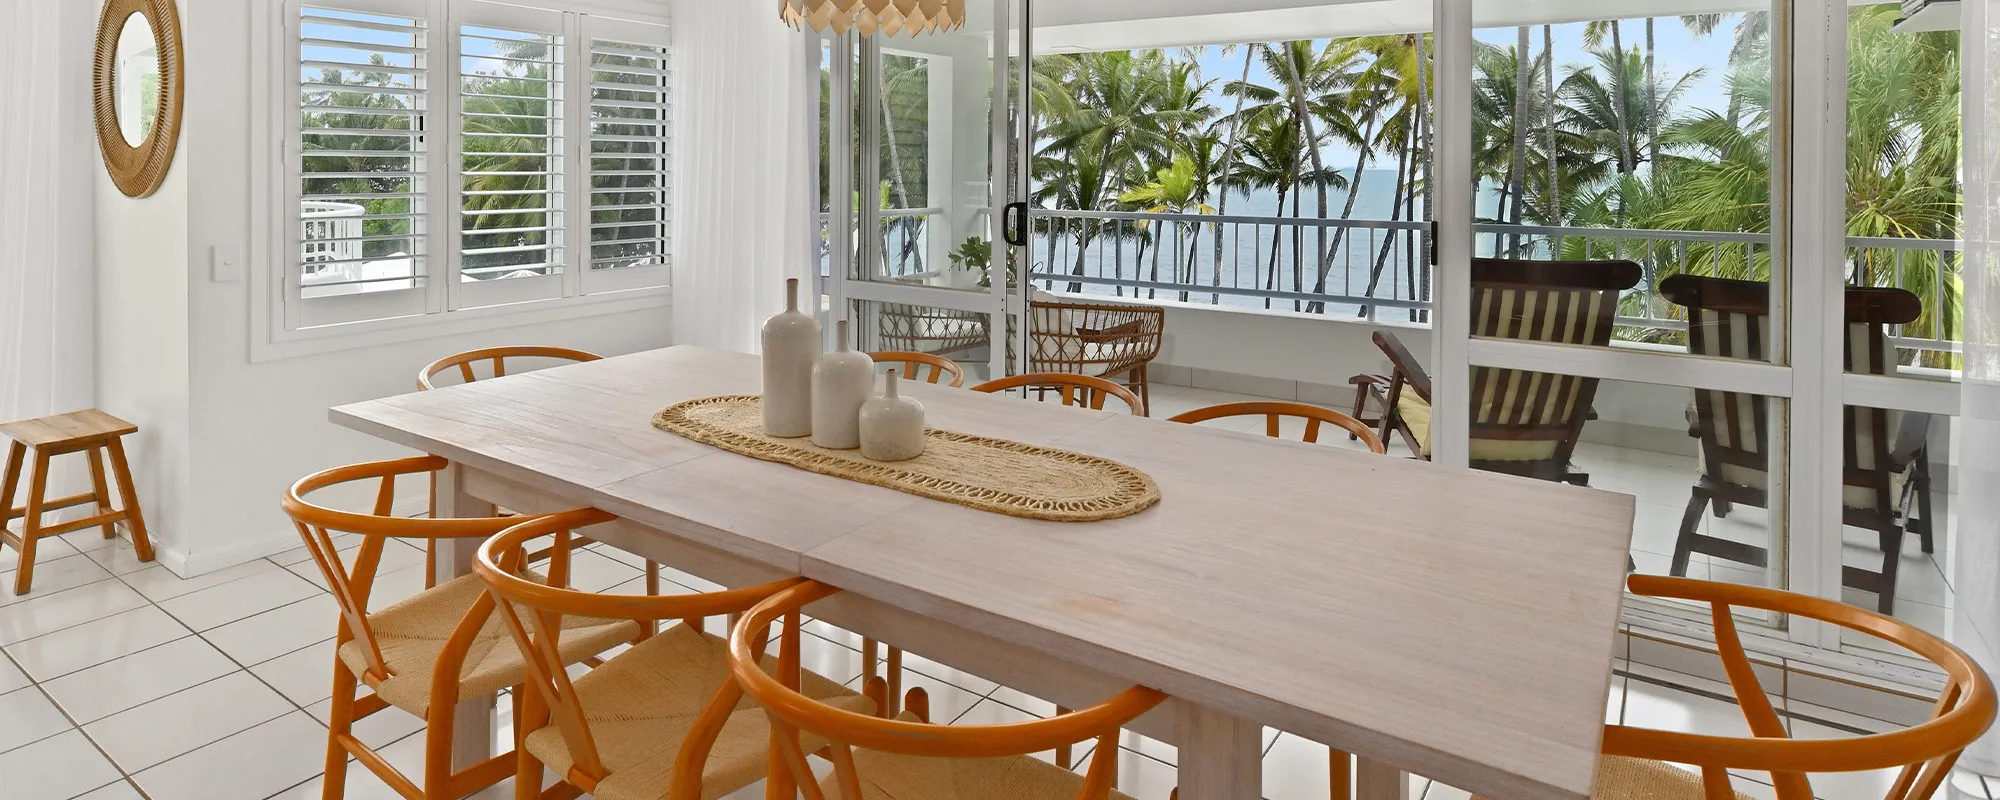 Alamanda Palm Cove by Lancemore Boutique Luxury Accommodation Four Bedroom Apartment 2000 x 800 v2